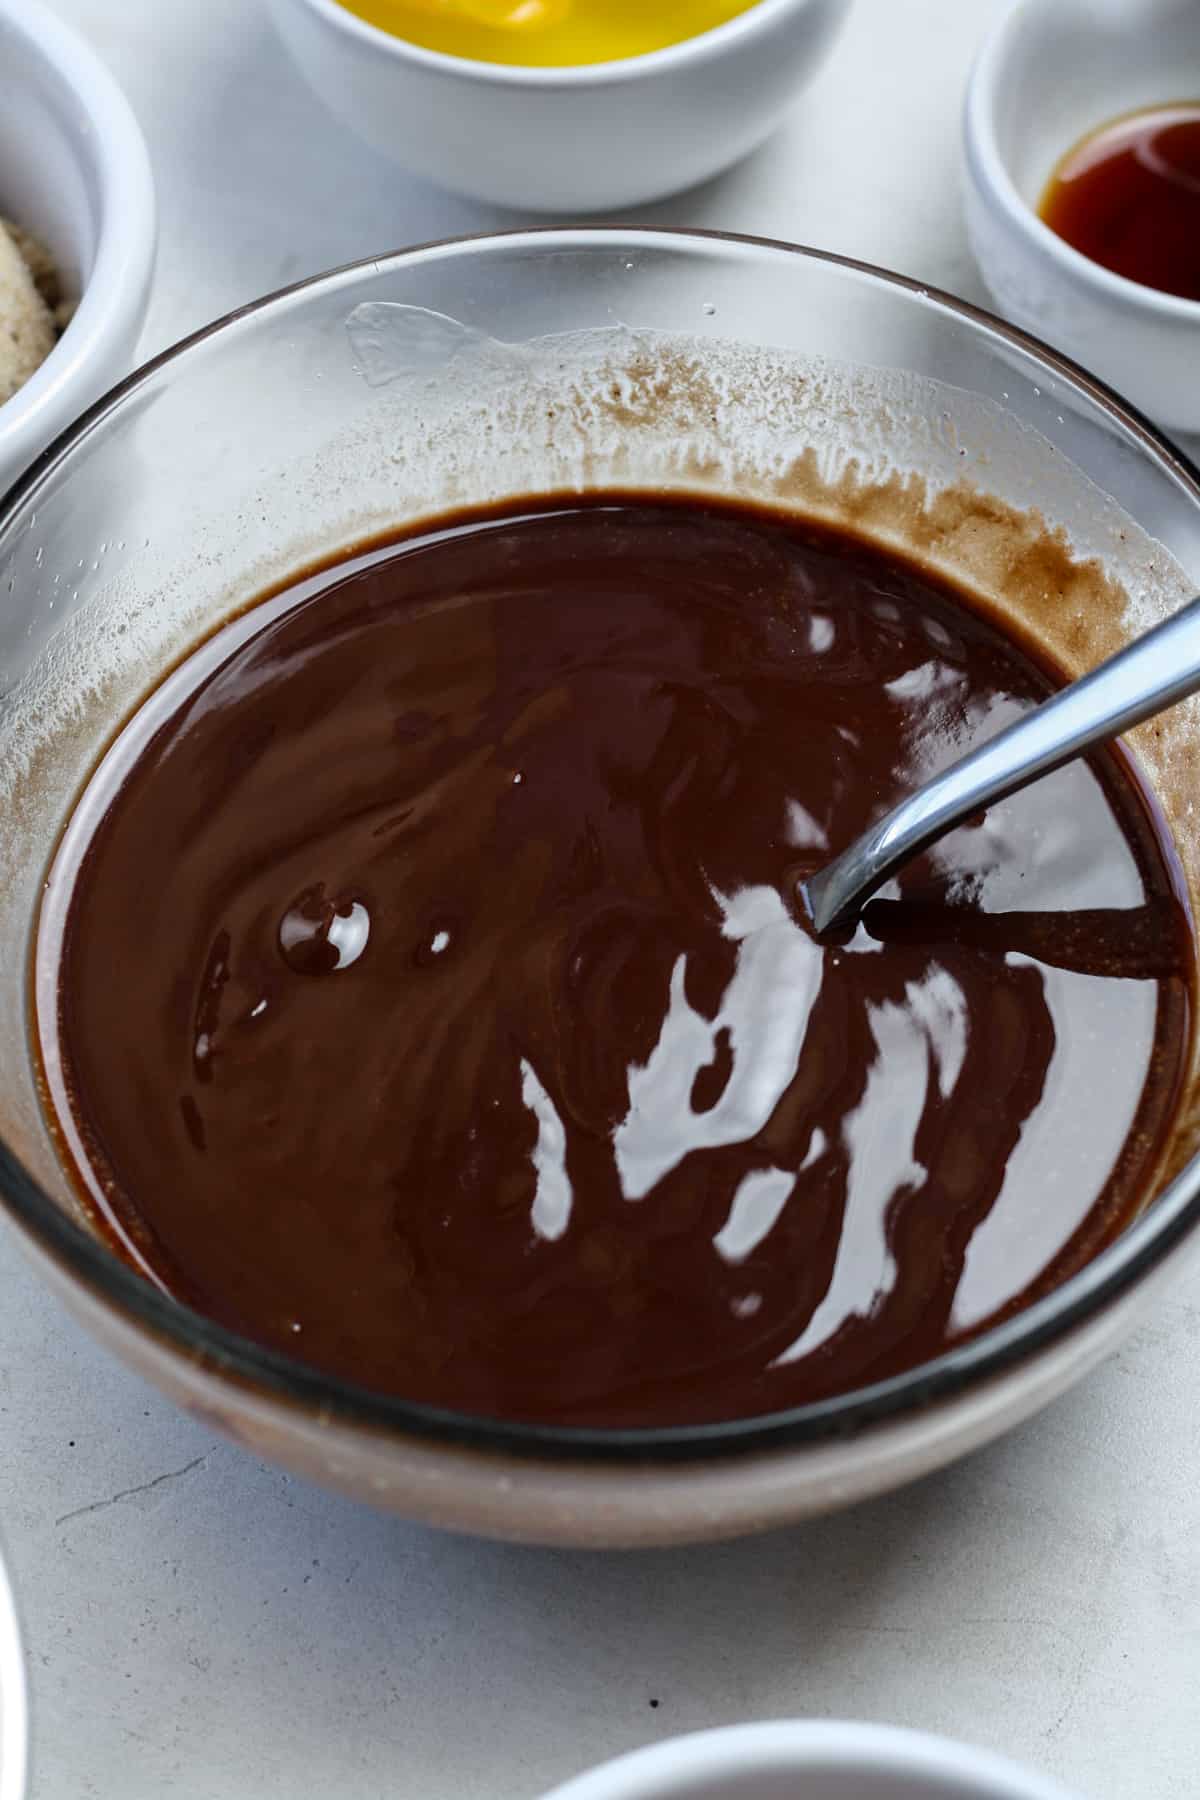 Creamy melted chocolate in bowl